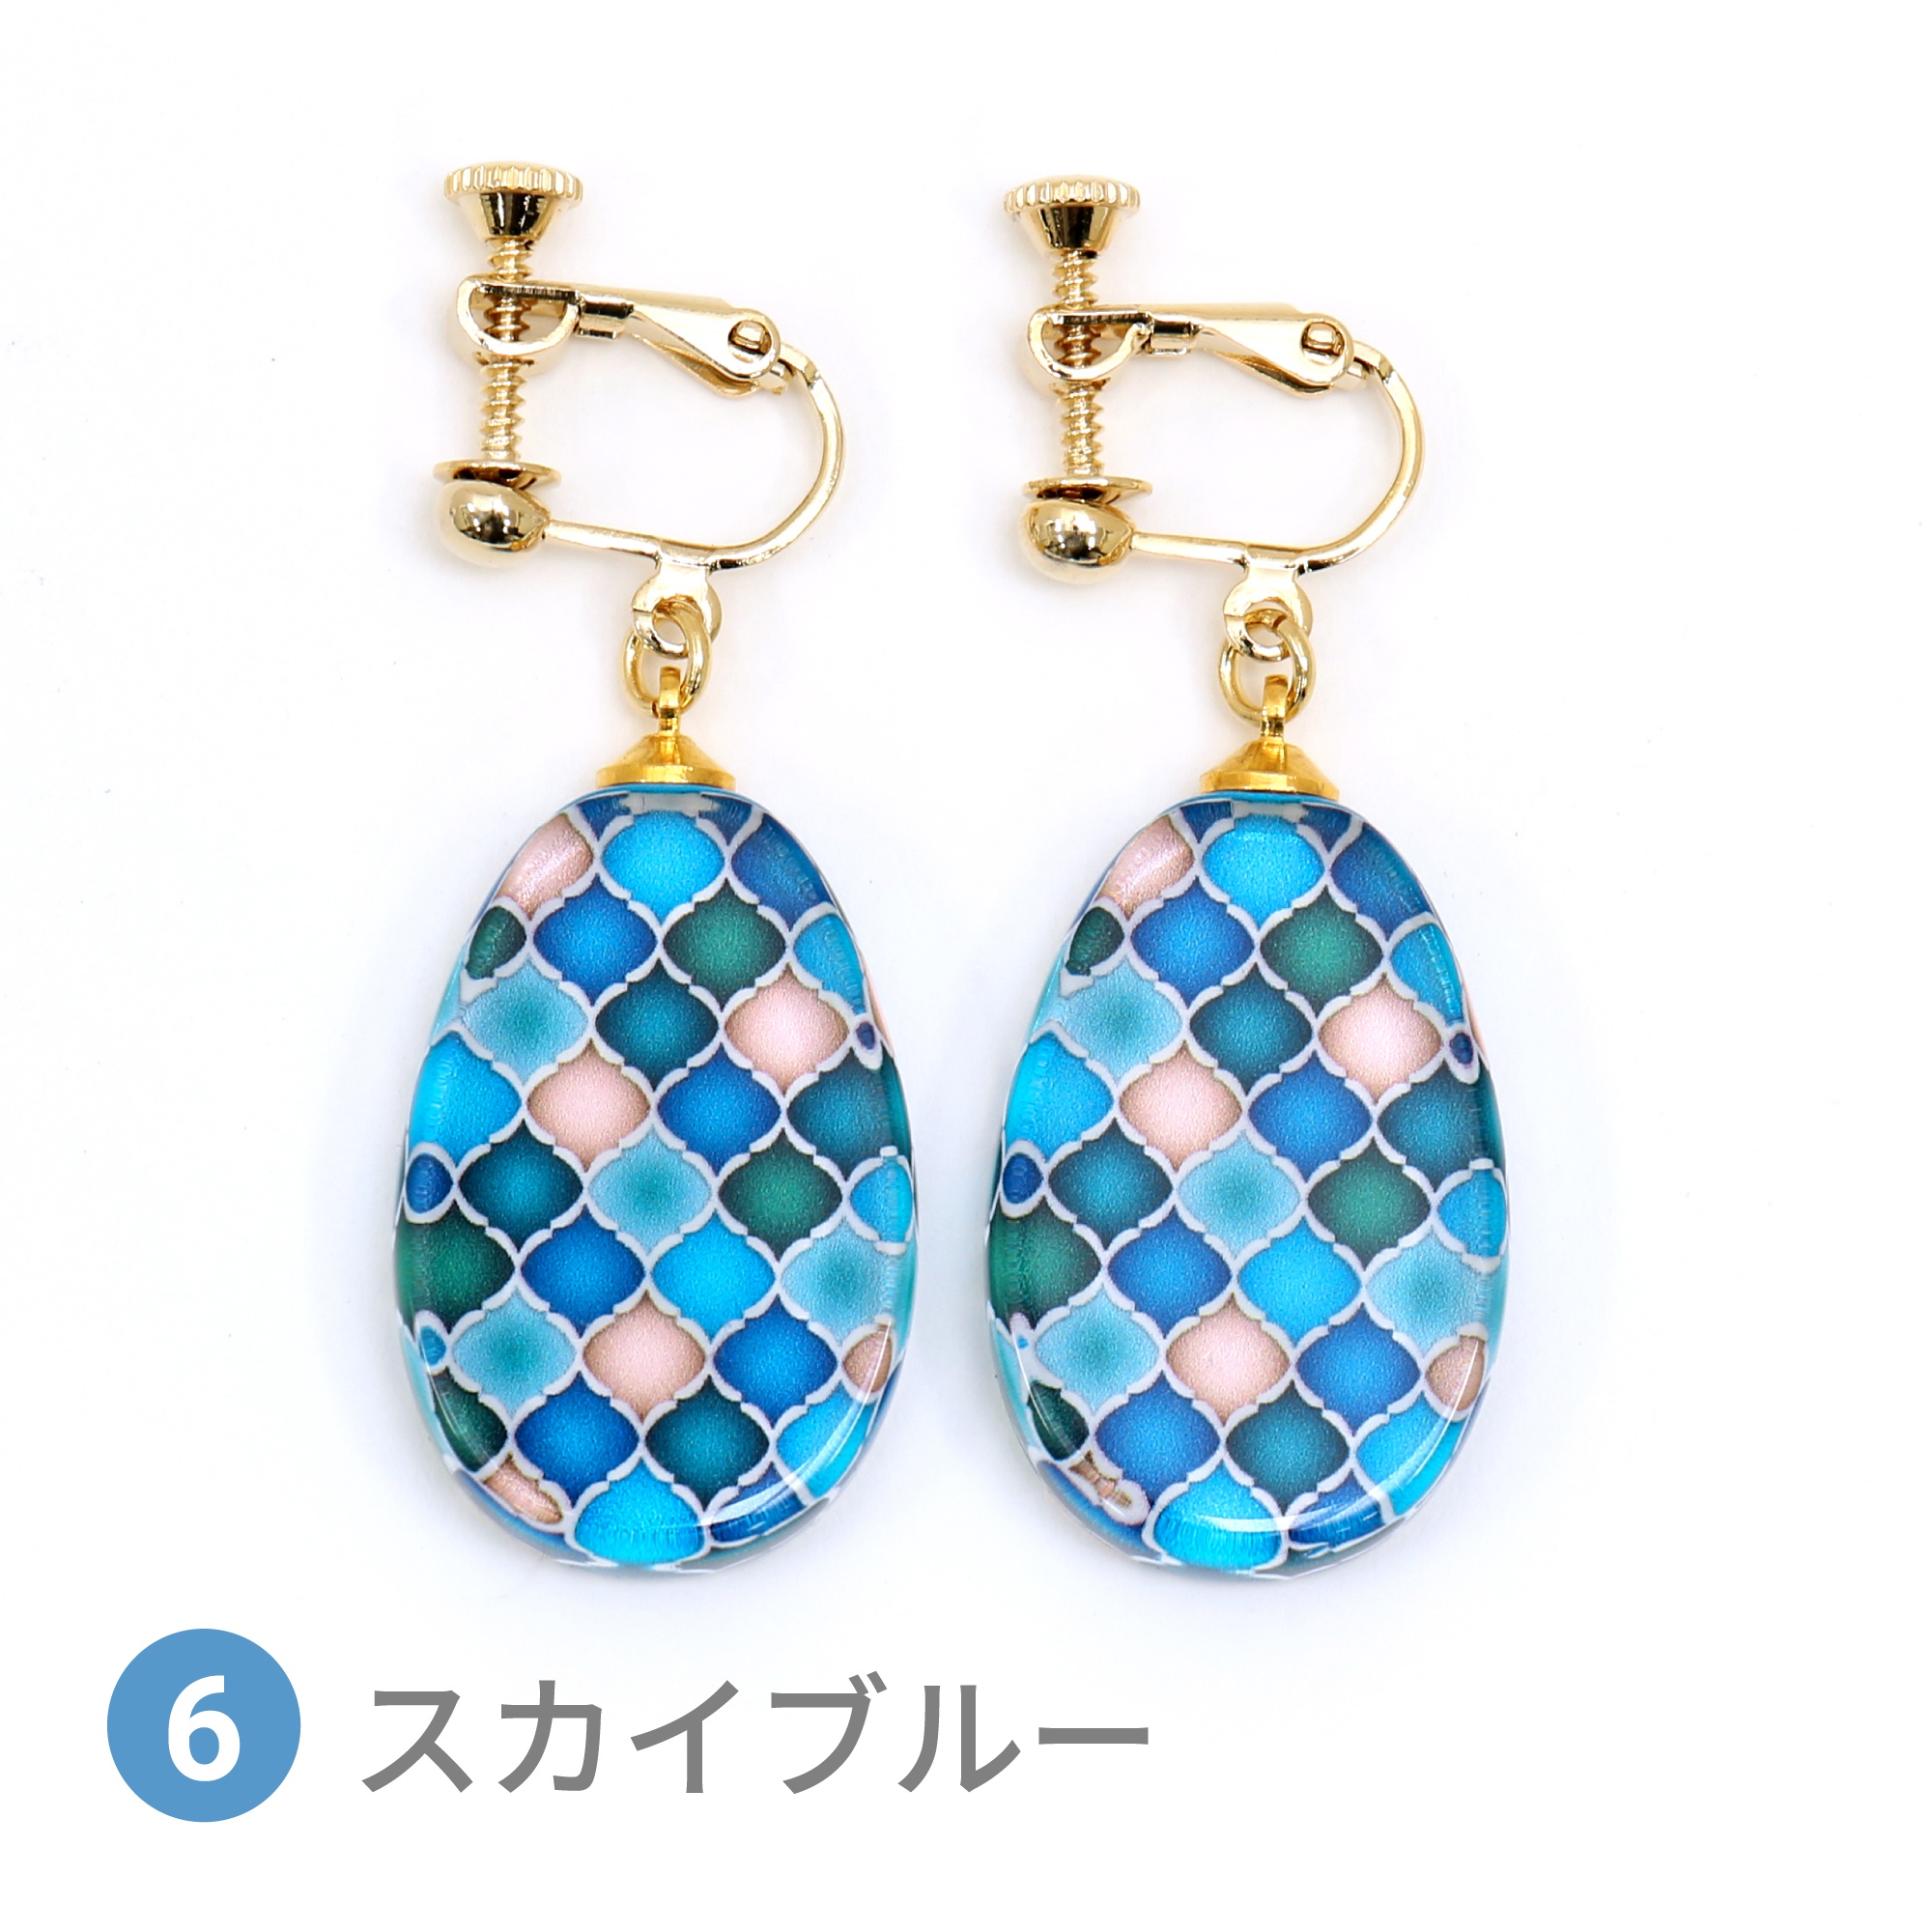 Glass accessories Earring MOROCCAN skyblue drop shape